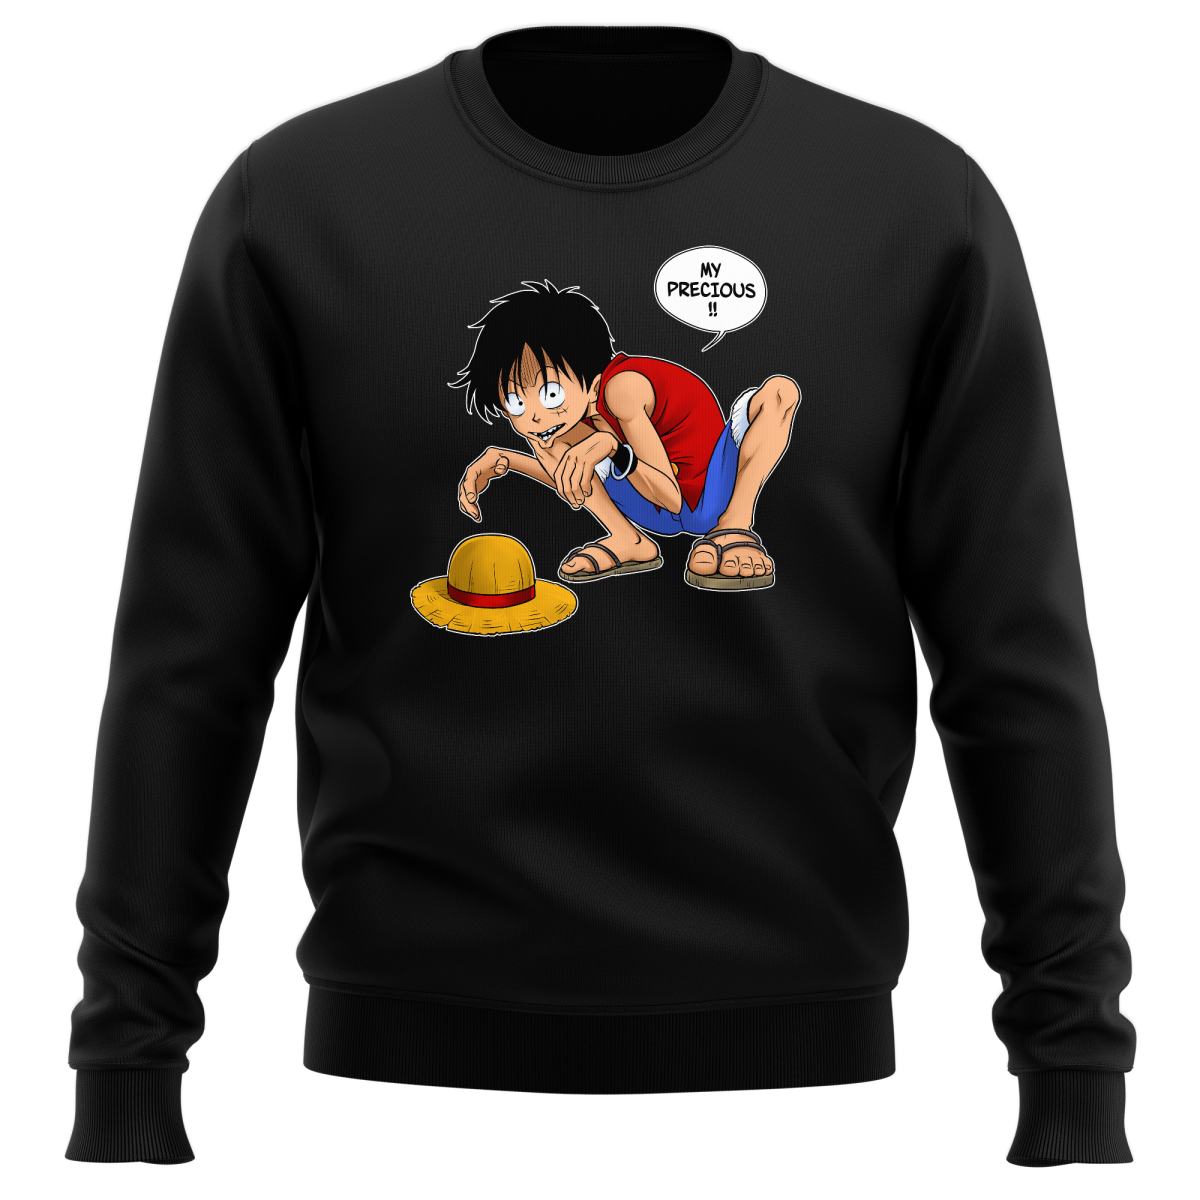 Funny One Piece The Lord Of The Rings Sweater Monkey D Luffy And Gollum One Piece The Lord Of The Rings Parody Ref 744